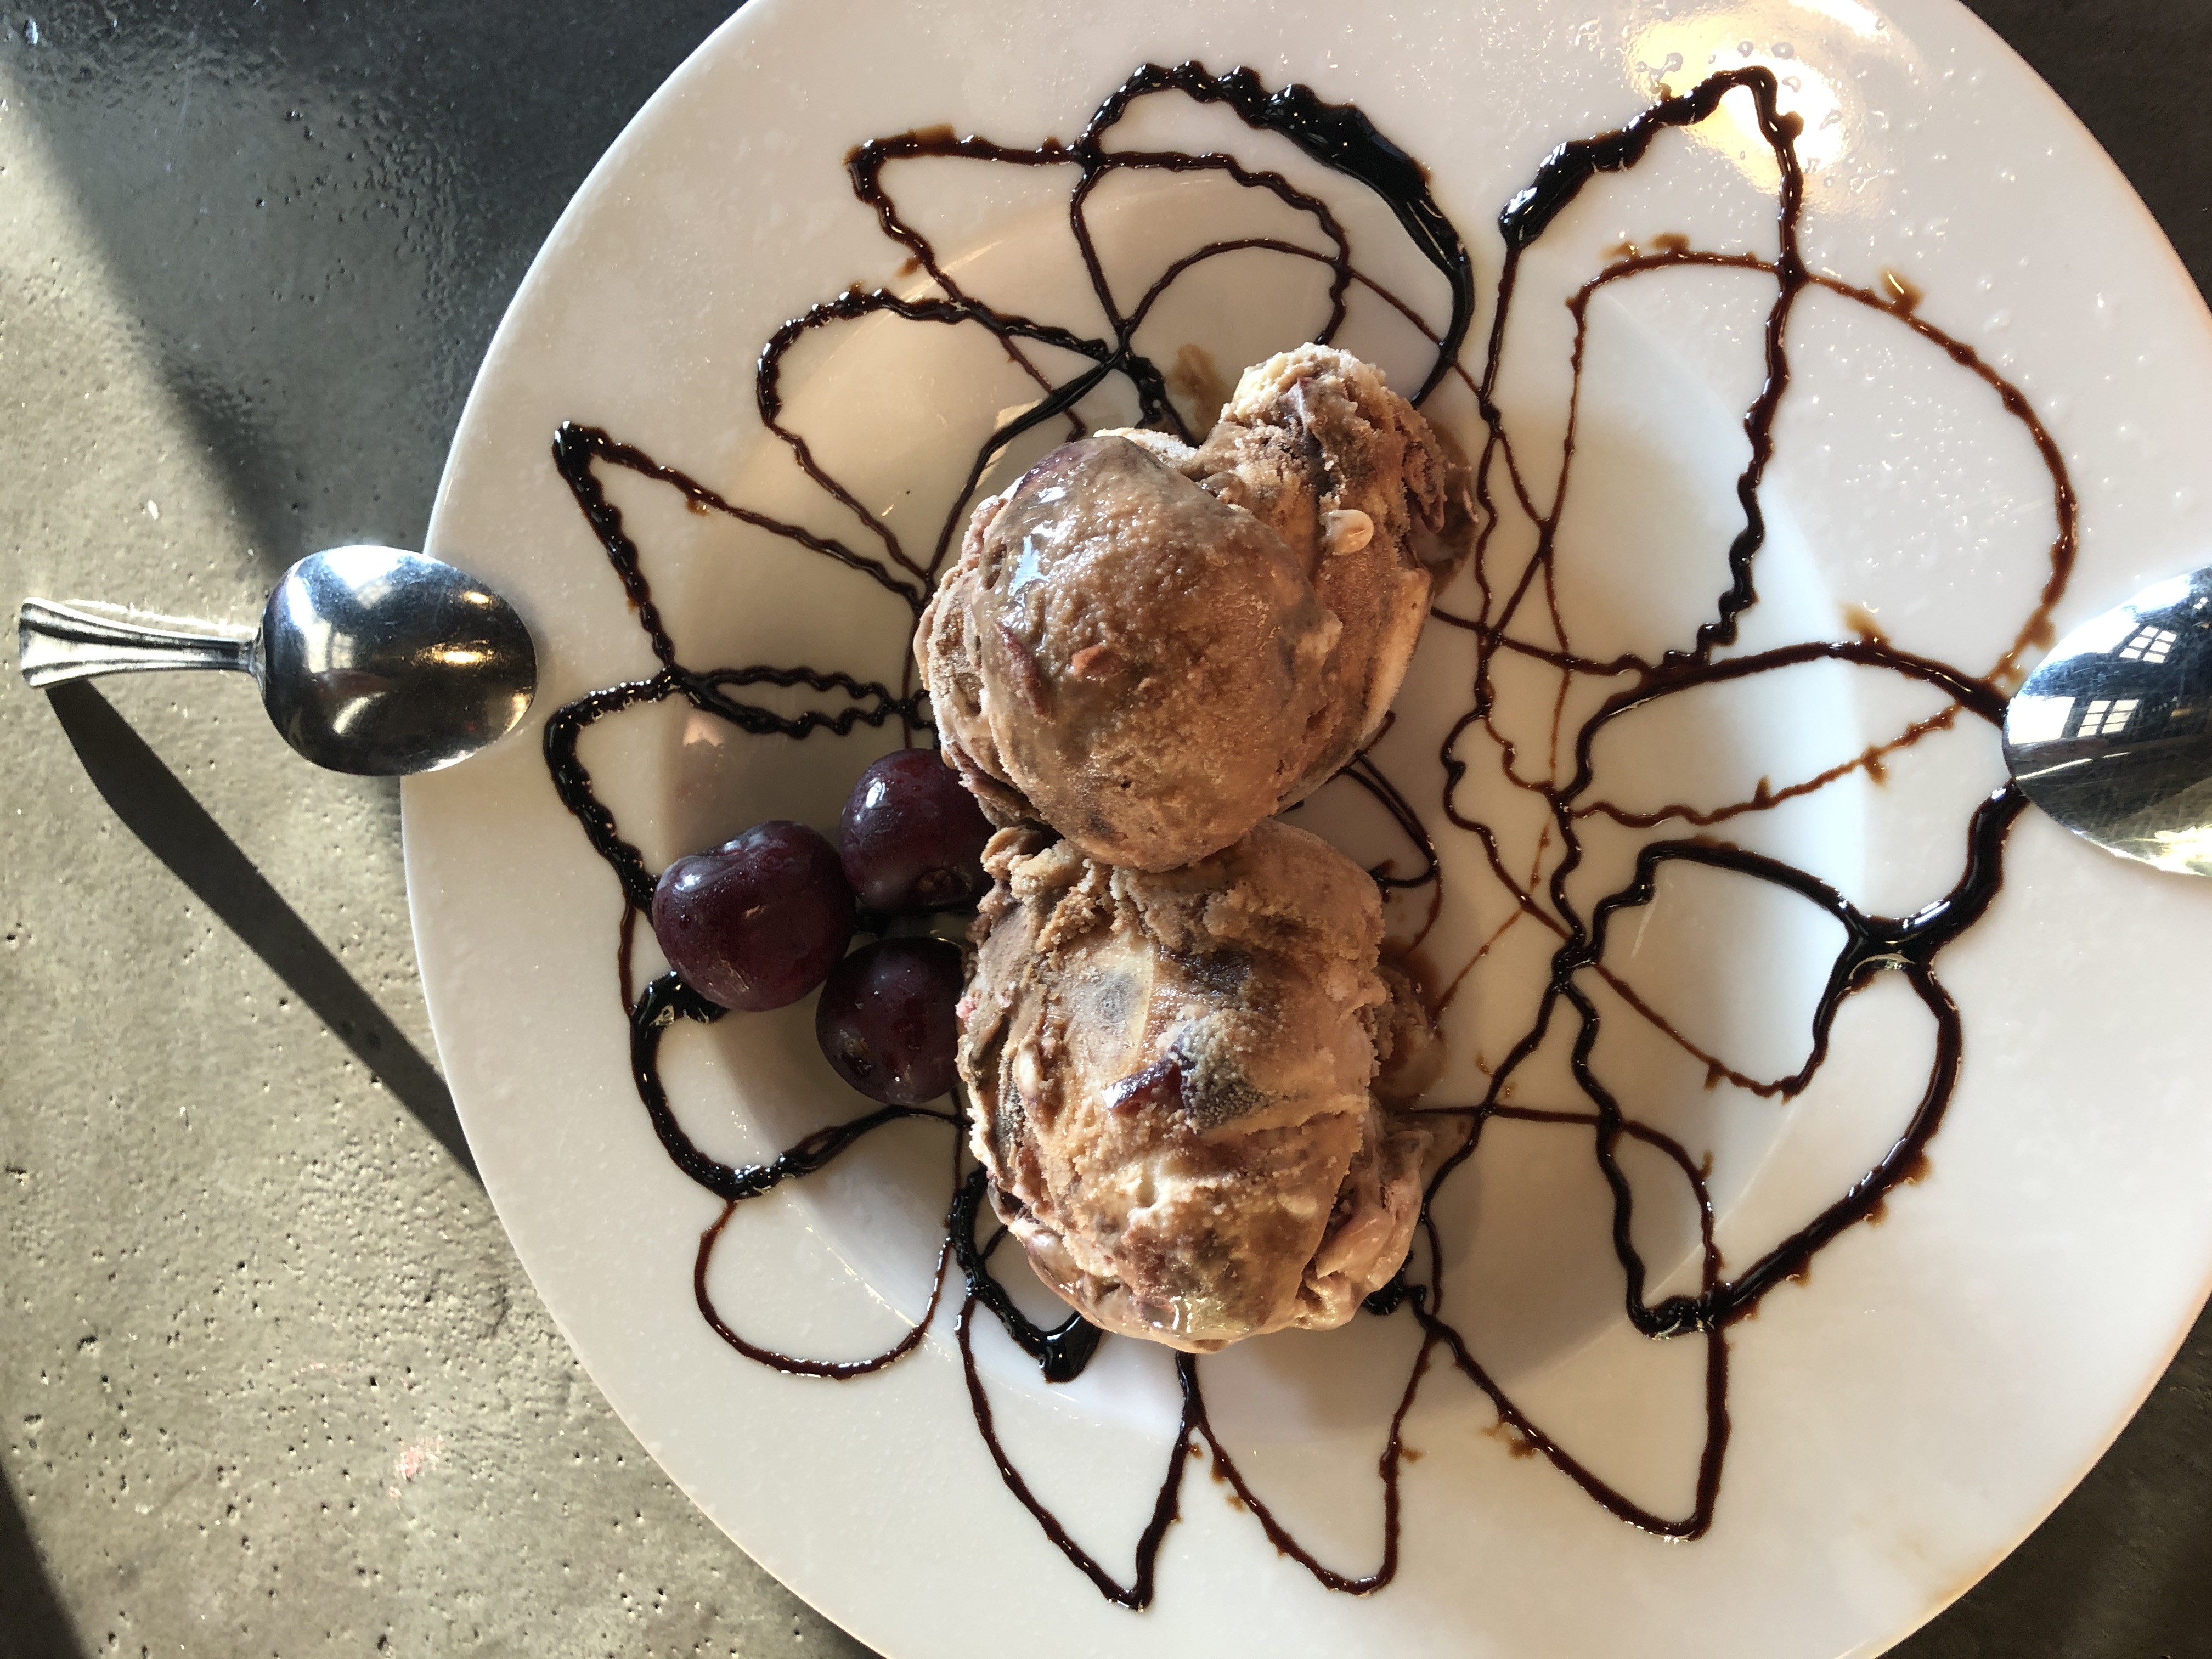 Two scoops of ice cream surrounded by curls of chocolate sauce on the plate.